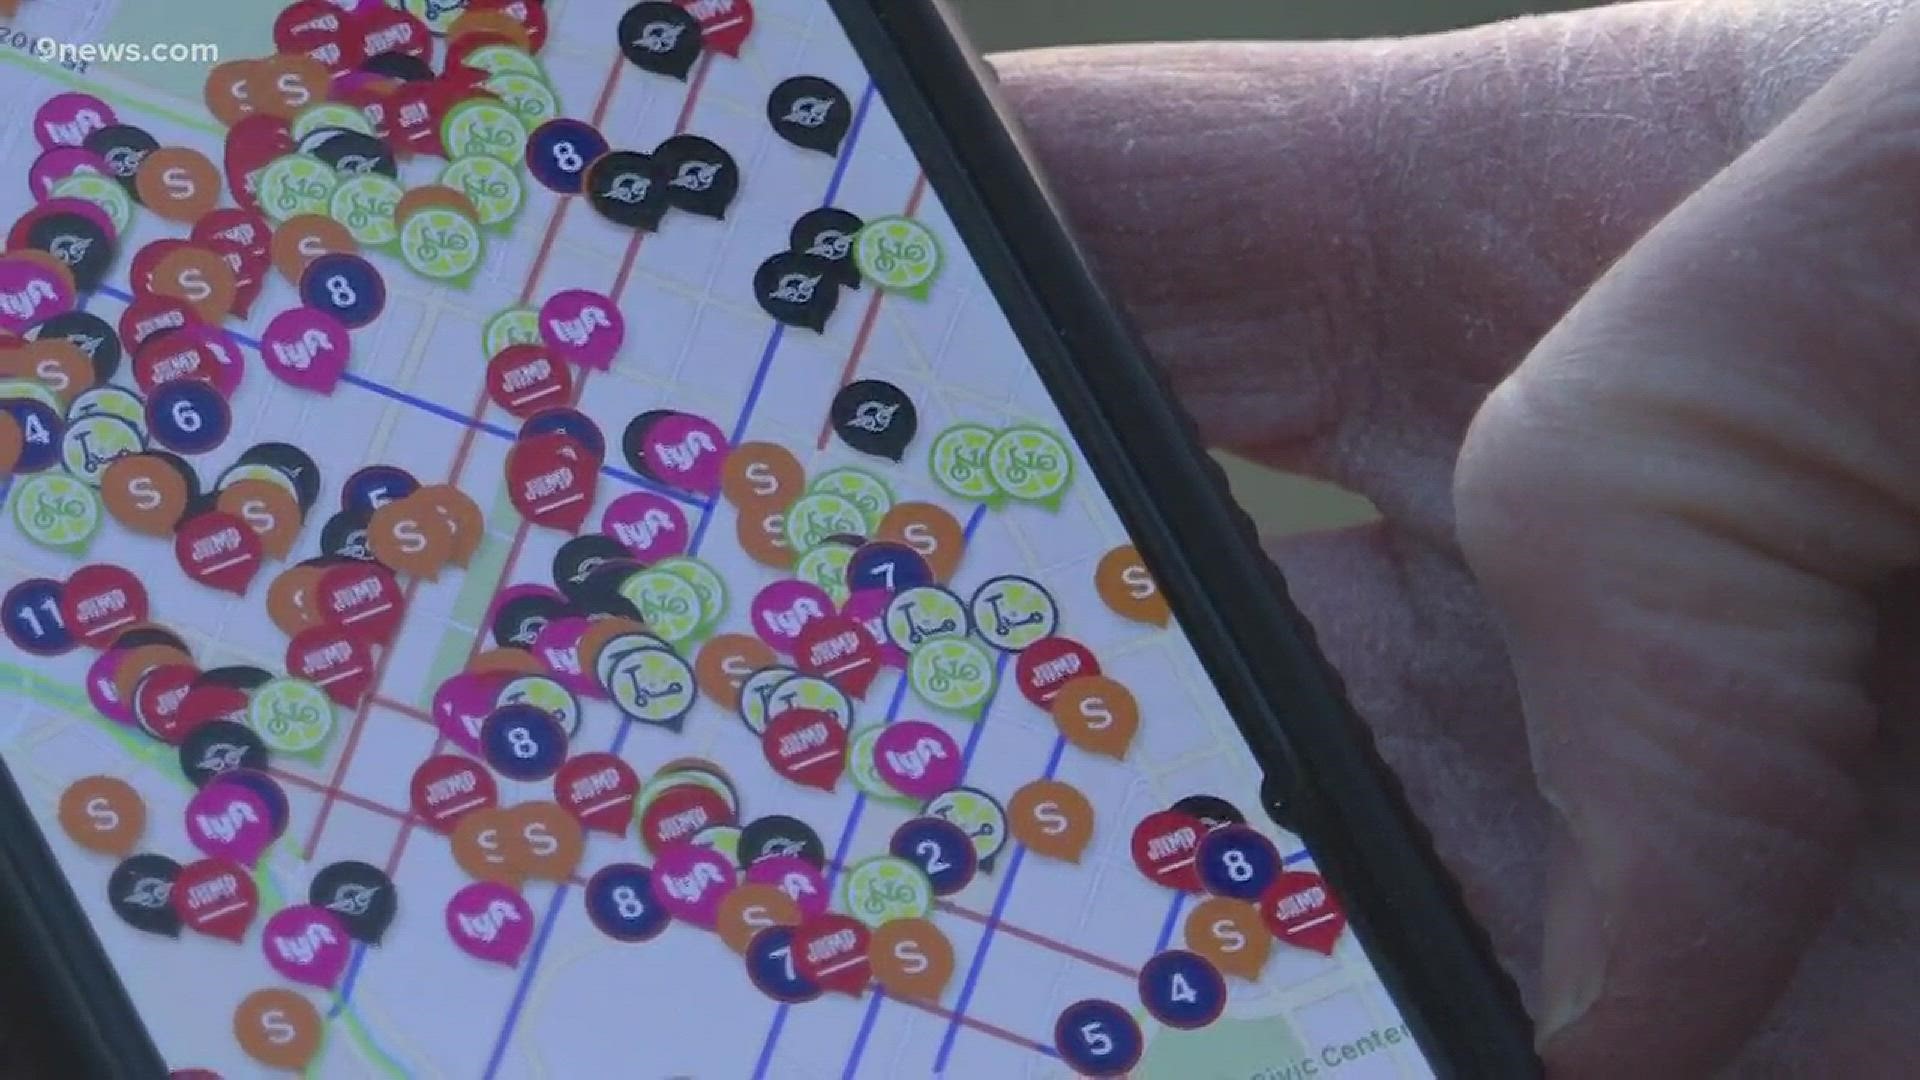 A Denver man created the app called 'Scooter Life' and allows you to just look at one app to see where all the rideshare scooters around you are. "Apps that I've done - they're basically things I do or use on a daily basis and fill a need that I have. If other people use it, that's great."